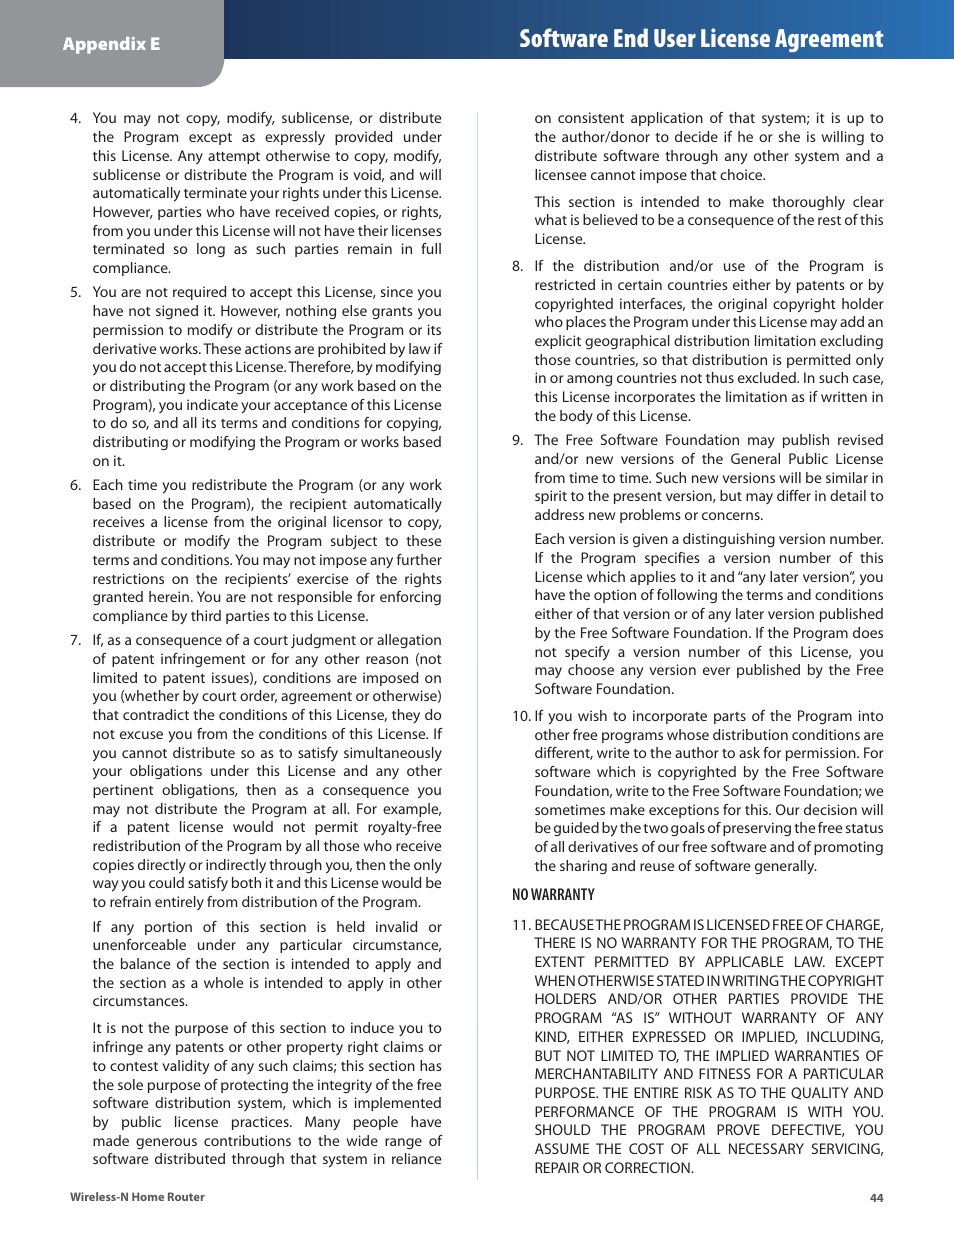 Software end user license agreement | Linksys WRT120N User Manual | Page 48 / 55